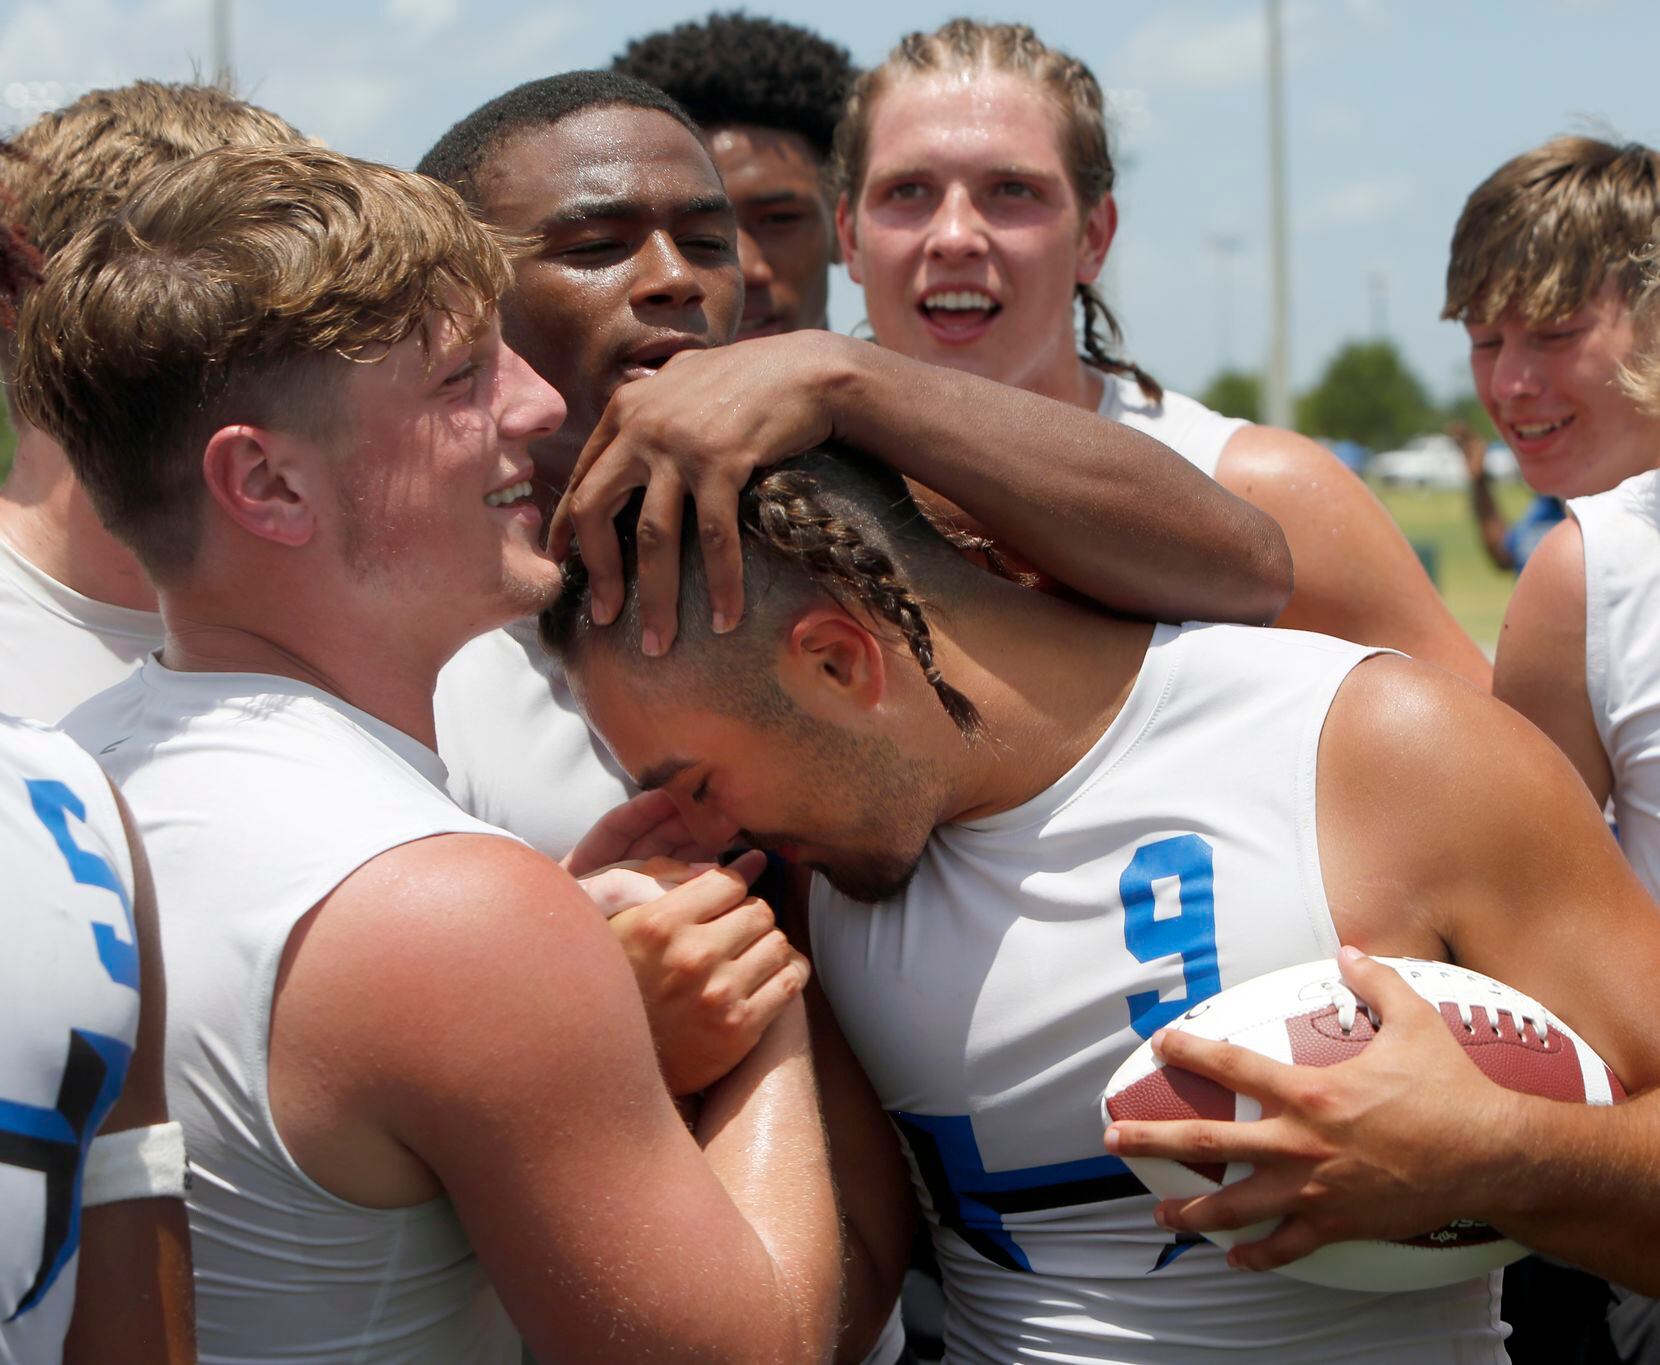 Hebron players surround and congratulate Hawks quarterback Jacob Buniff (9) after he accepted the championship football following their Division 1 championship victory over Lake Travis, 28-26.The state 7 on 7 football tournament attracted athletes from schools throughout the state. The competition brackets for the final day of competition was held at Veterans Park in College Station on June 25, 2021. (Steve Hamm/ Special Contributor)